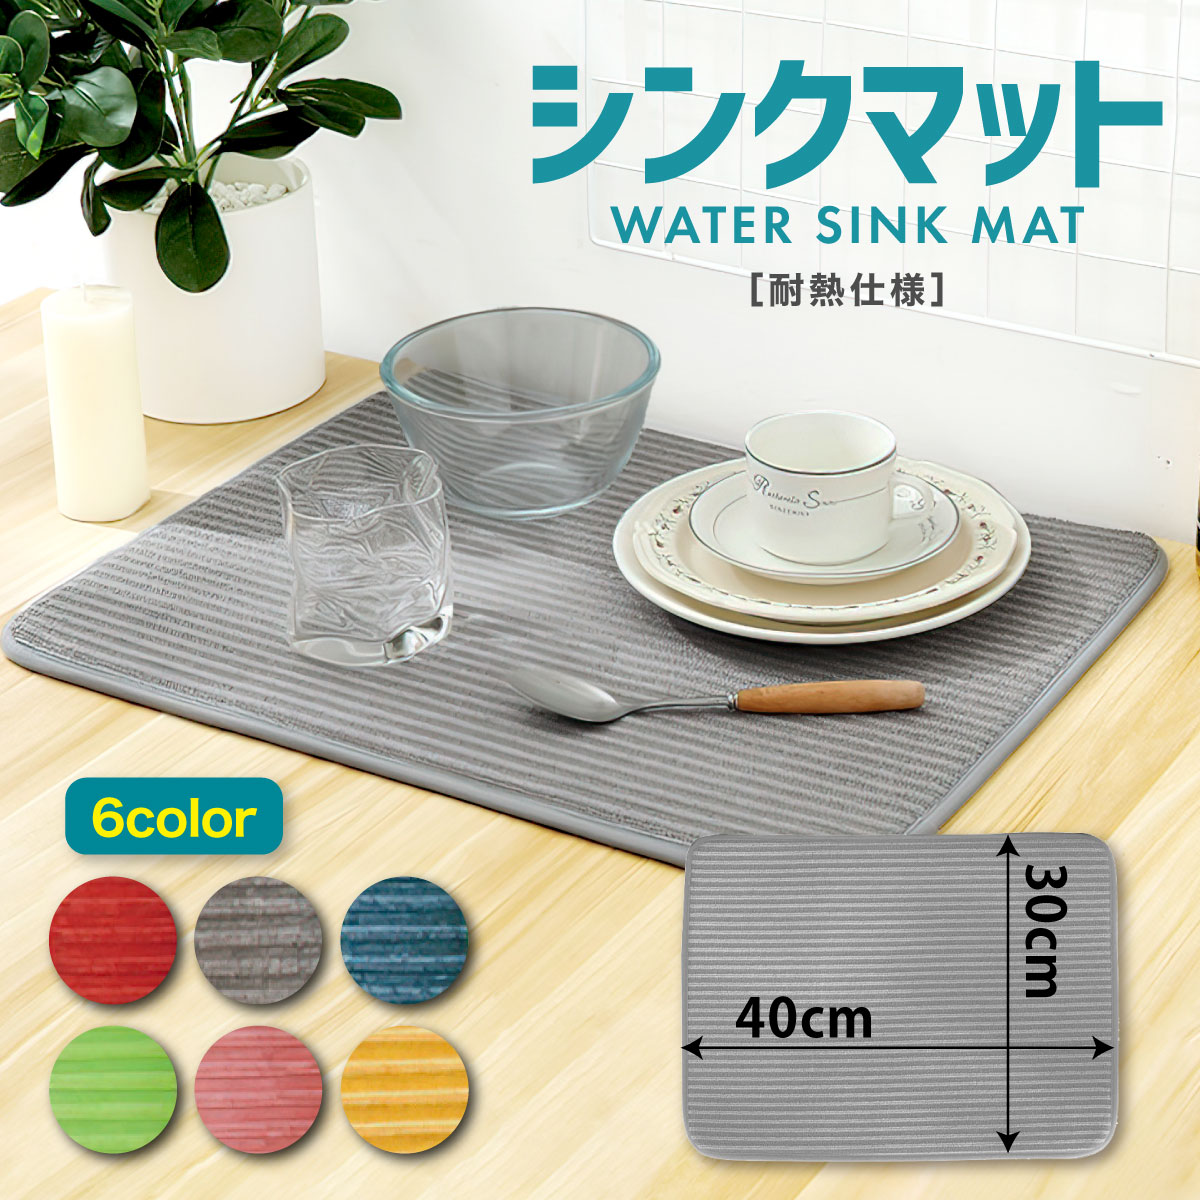  drainer mat kitchen ... large size large sink mat moment . water stylish faucet sink mat . water tableware put 